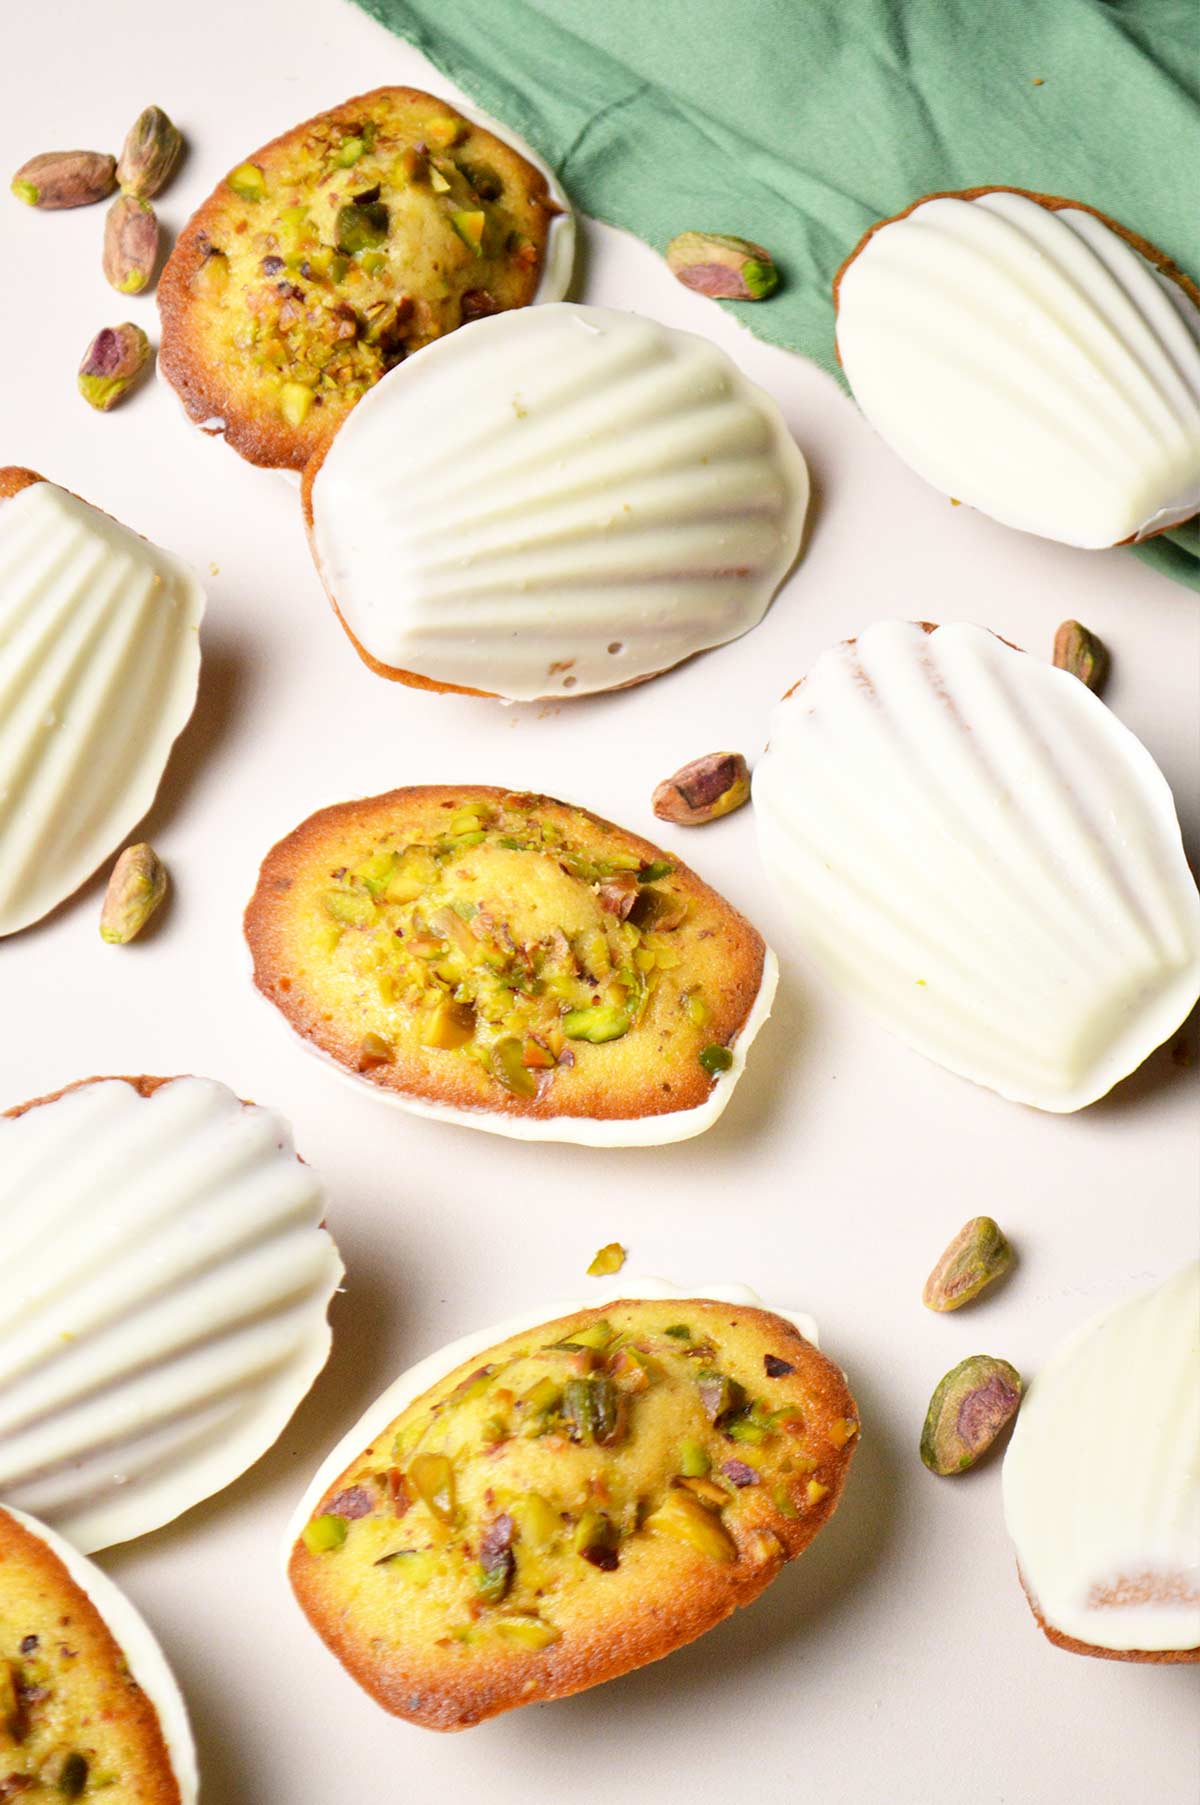 pistachio madeleines made with freshly grounded roasted pistachios and coated with white chocolate shell